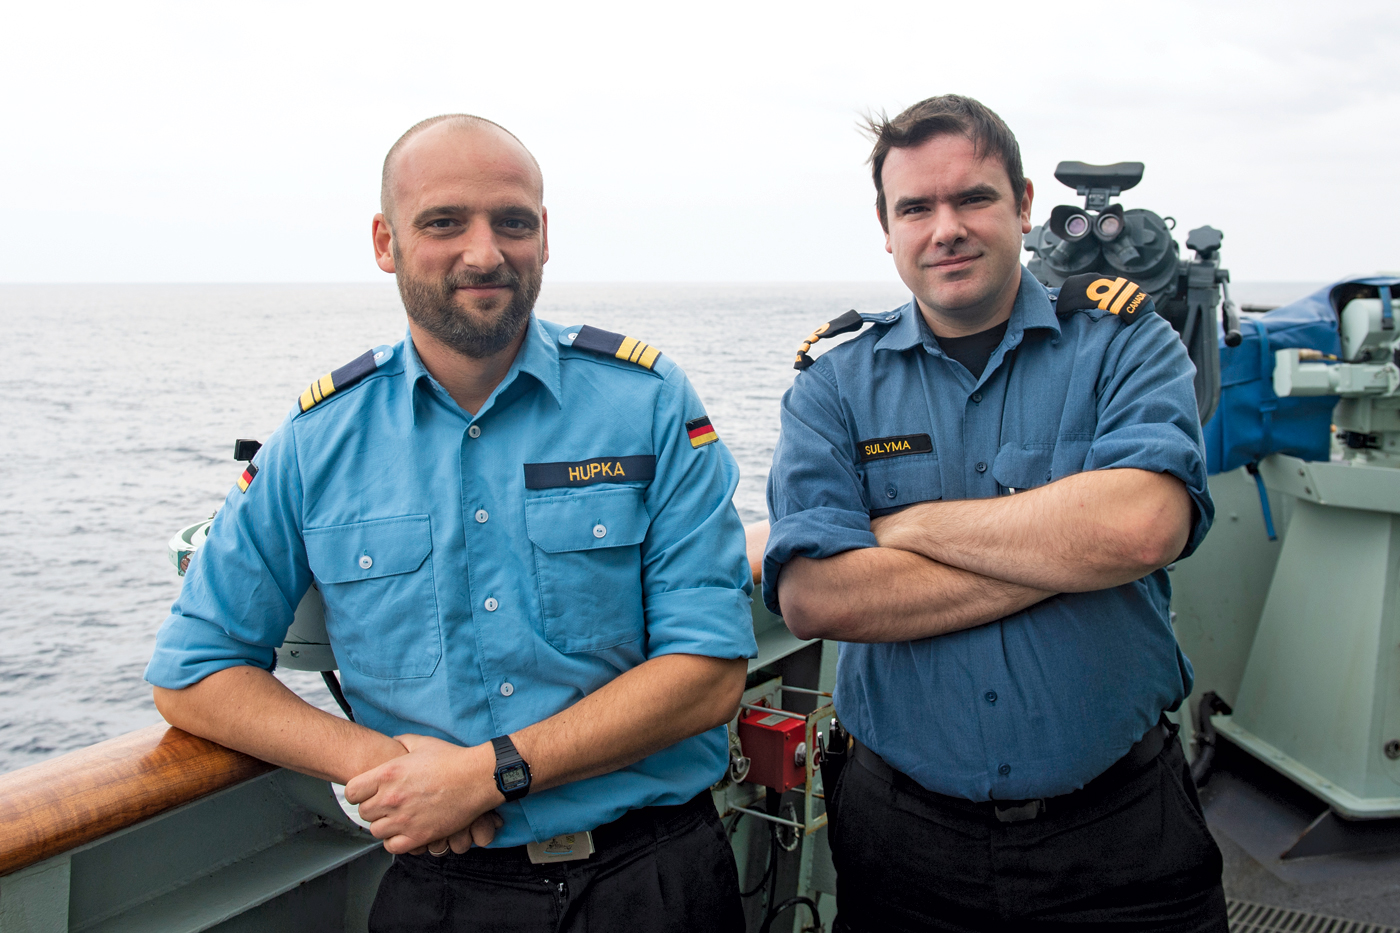 Kapitänleutnant Tim Hupka, a German Exchange Officer, and Lieutenant (Navy) Christopher Sulyma, on the bridge wing of HMCS Winnipeg. Photo by MCpl Andre Maillet, MARPAC Imaging Services